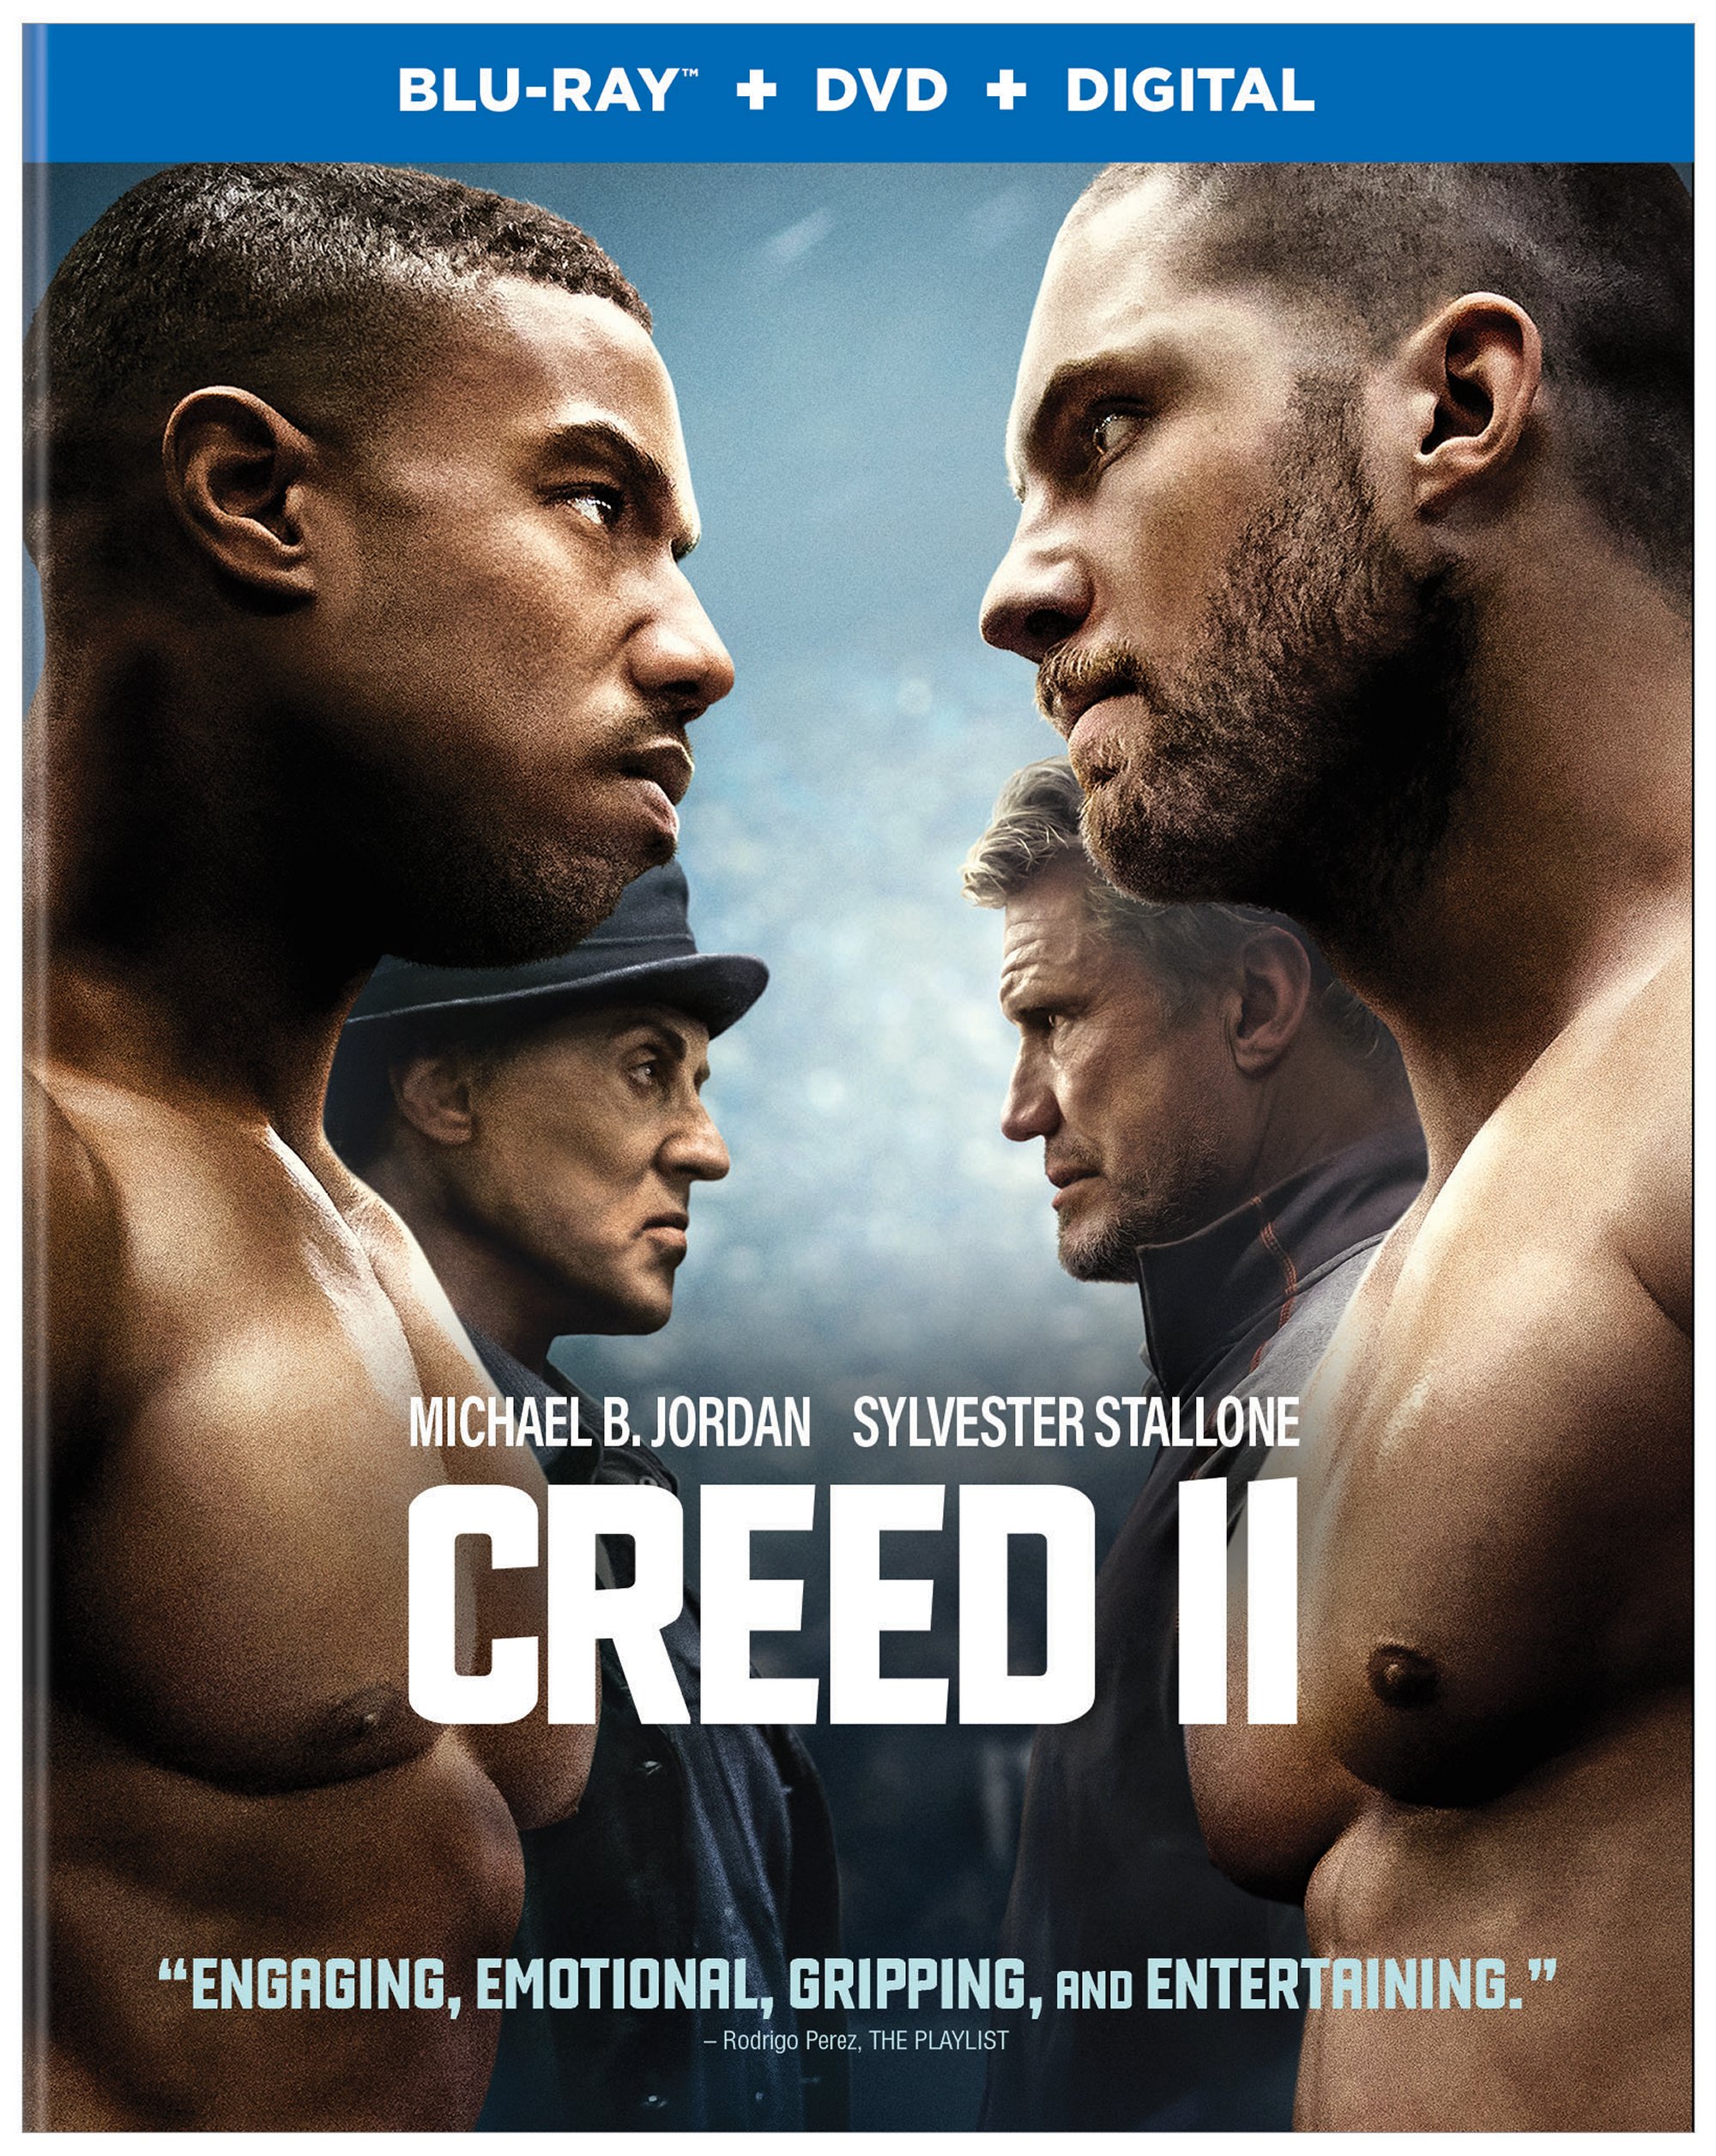 Creed II now available to own